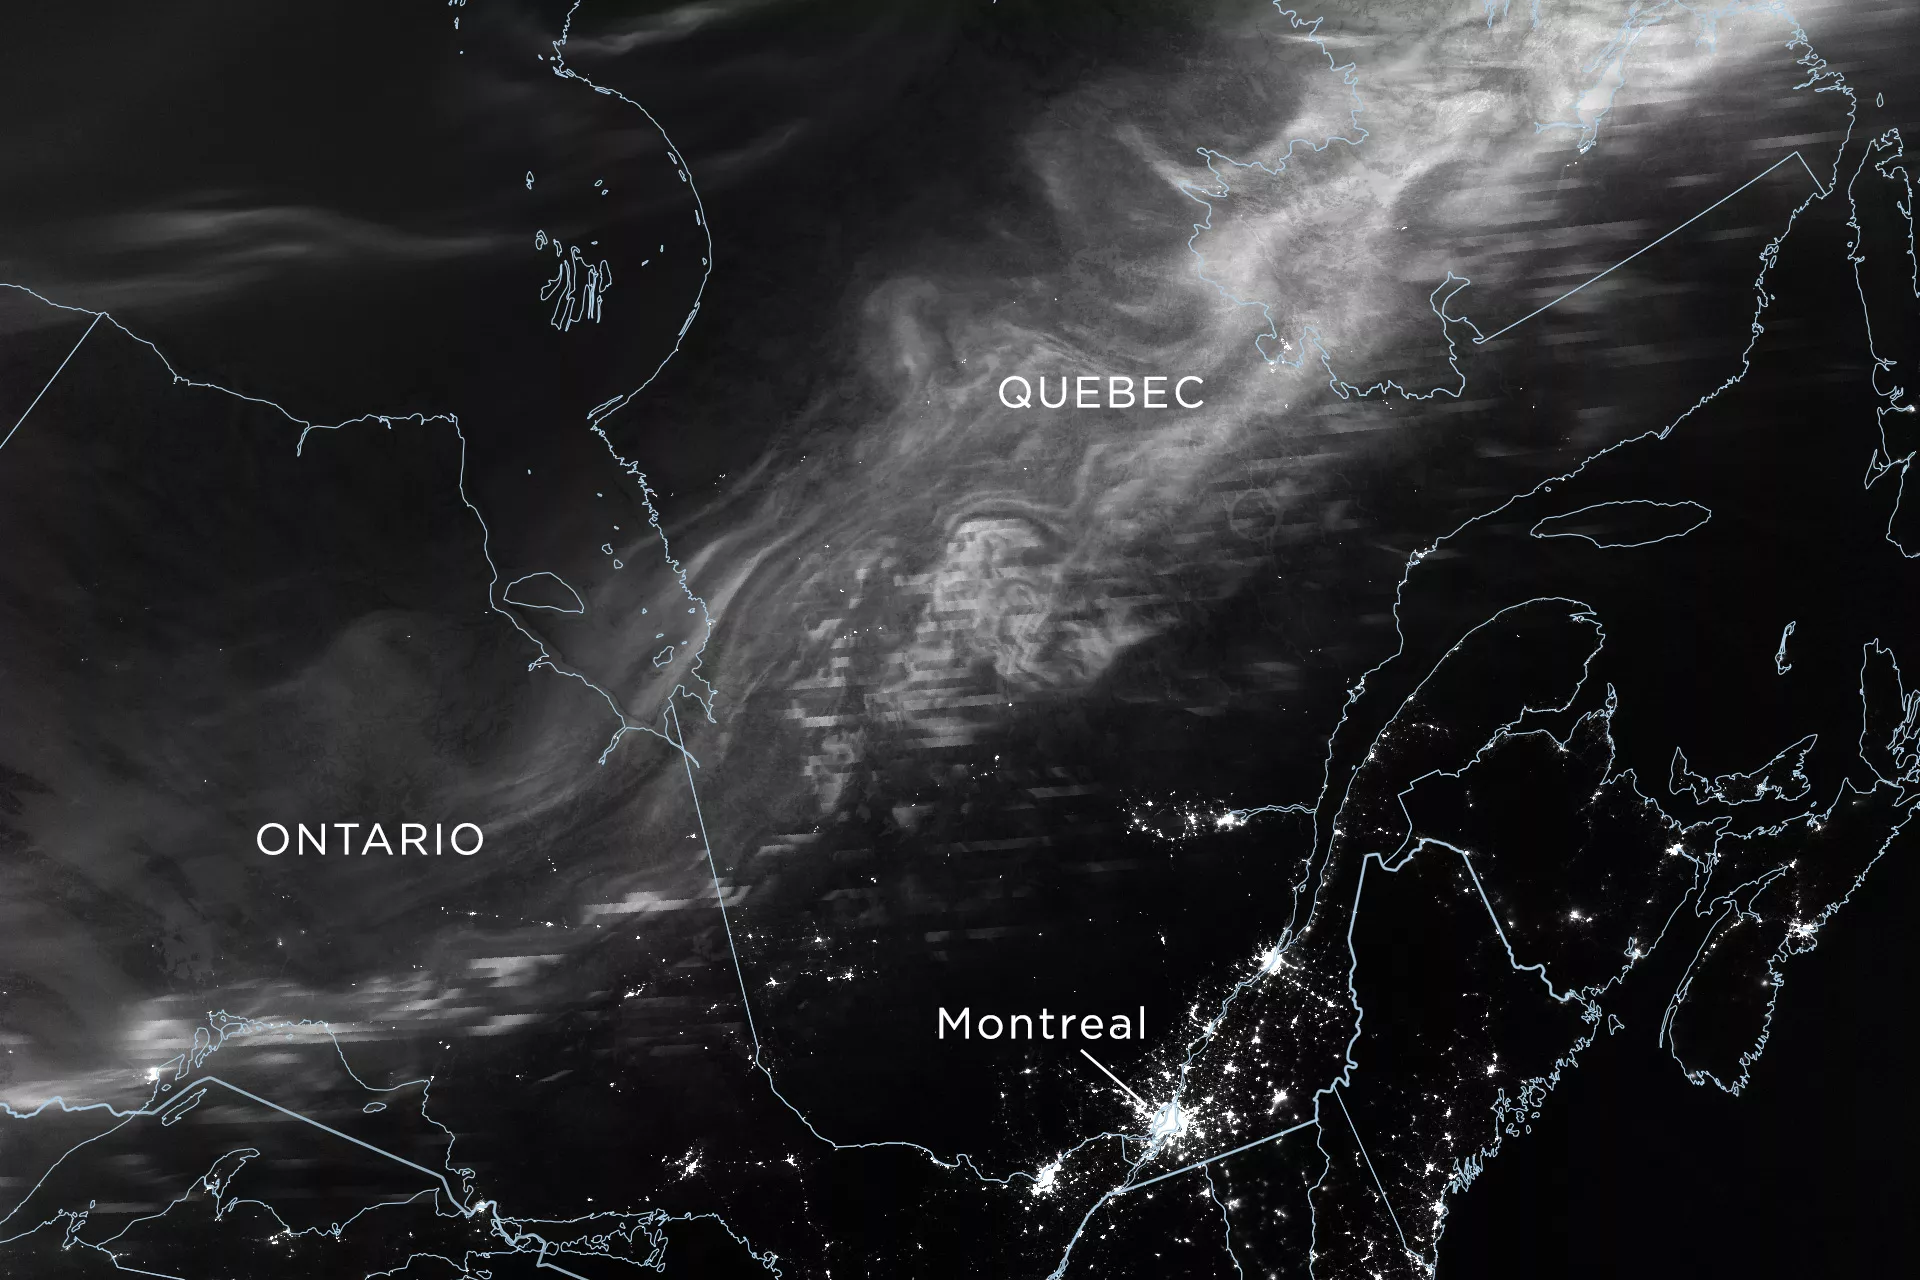 A greyscale satellite image over map contours of regions in Northeastern US and Canada, capturing the illumination from the aurora. 